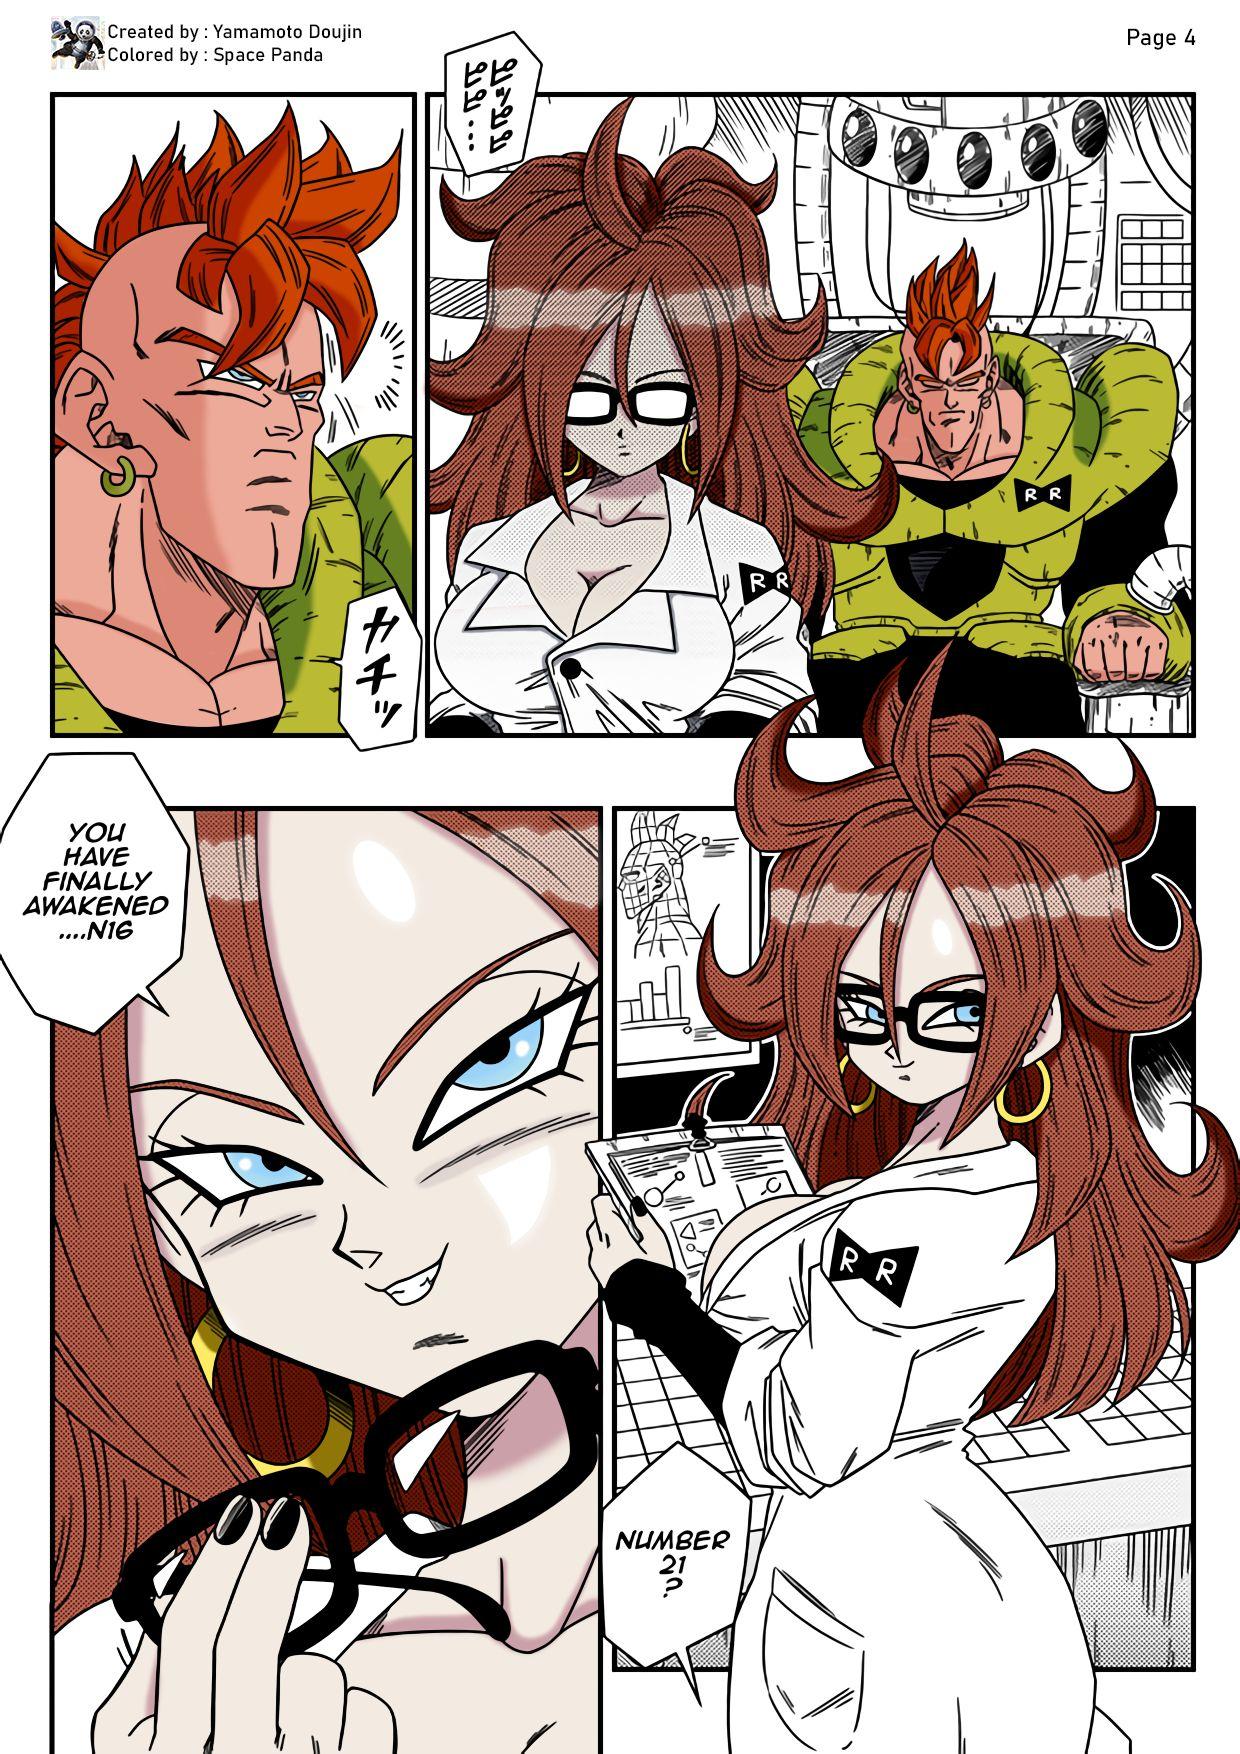 Kyonyuu Android Sekai Seiha o Netsubou!! Android 21 Shutsugen!! | Busty Android Wants to Dominate the World! 3